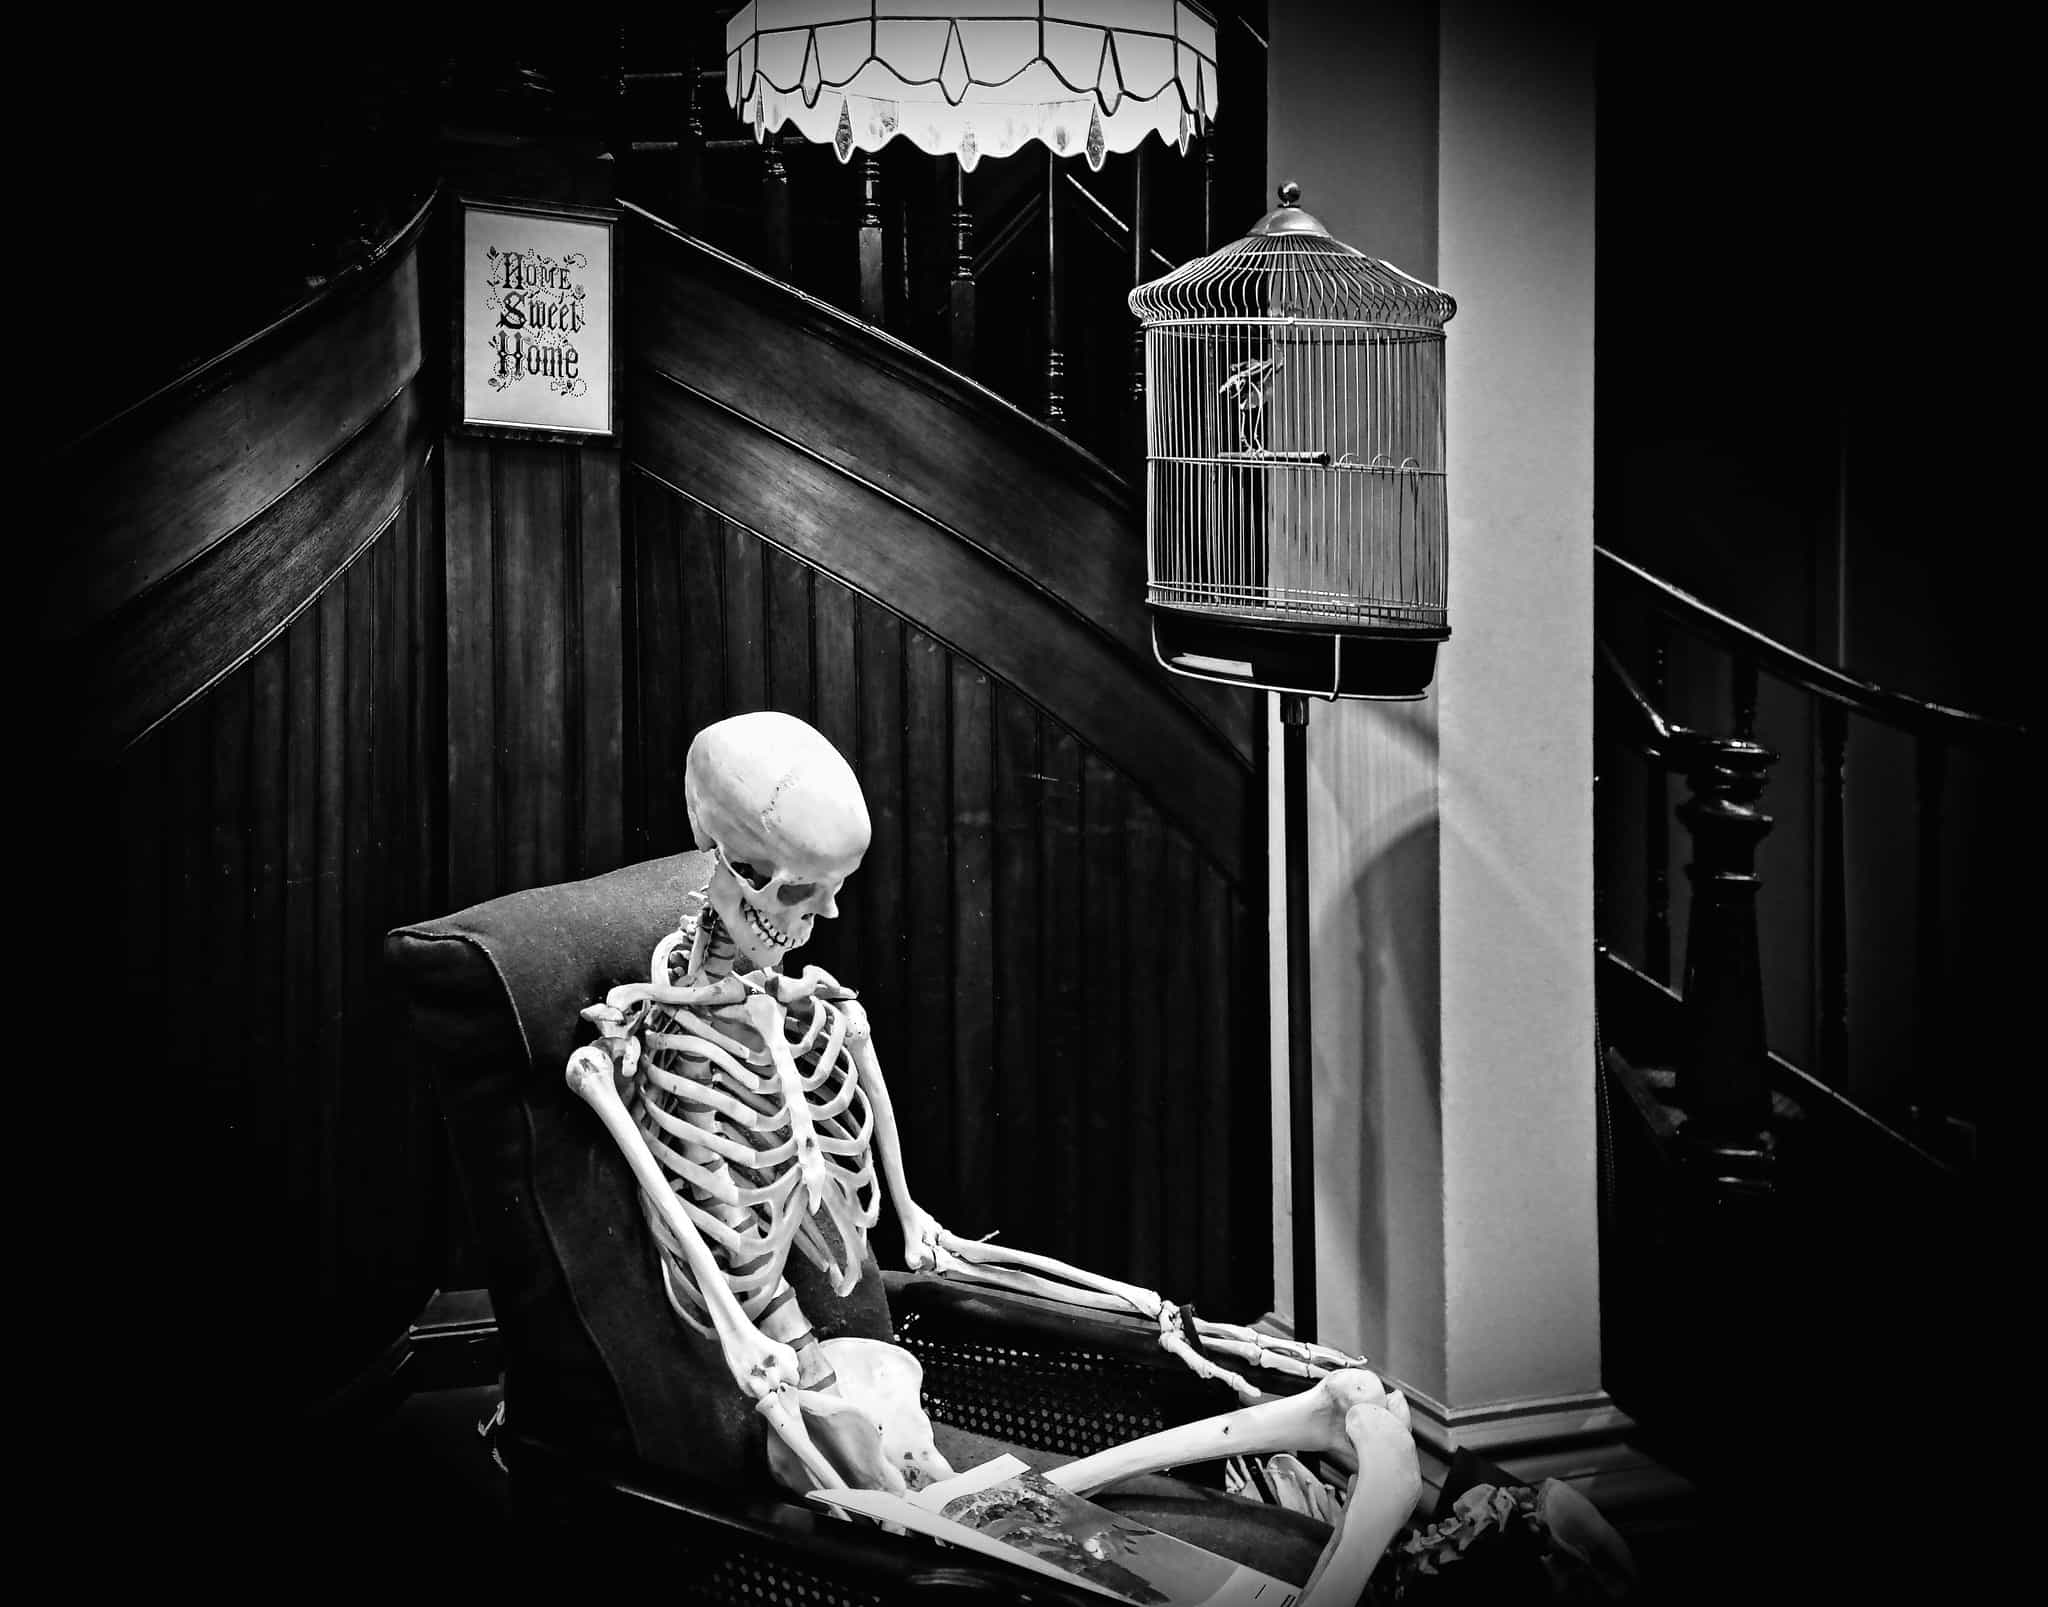 Home Sweet Home? Black and white image of a skeleton sitting in a reading chair reading a book with a skeletal bird in a cage